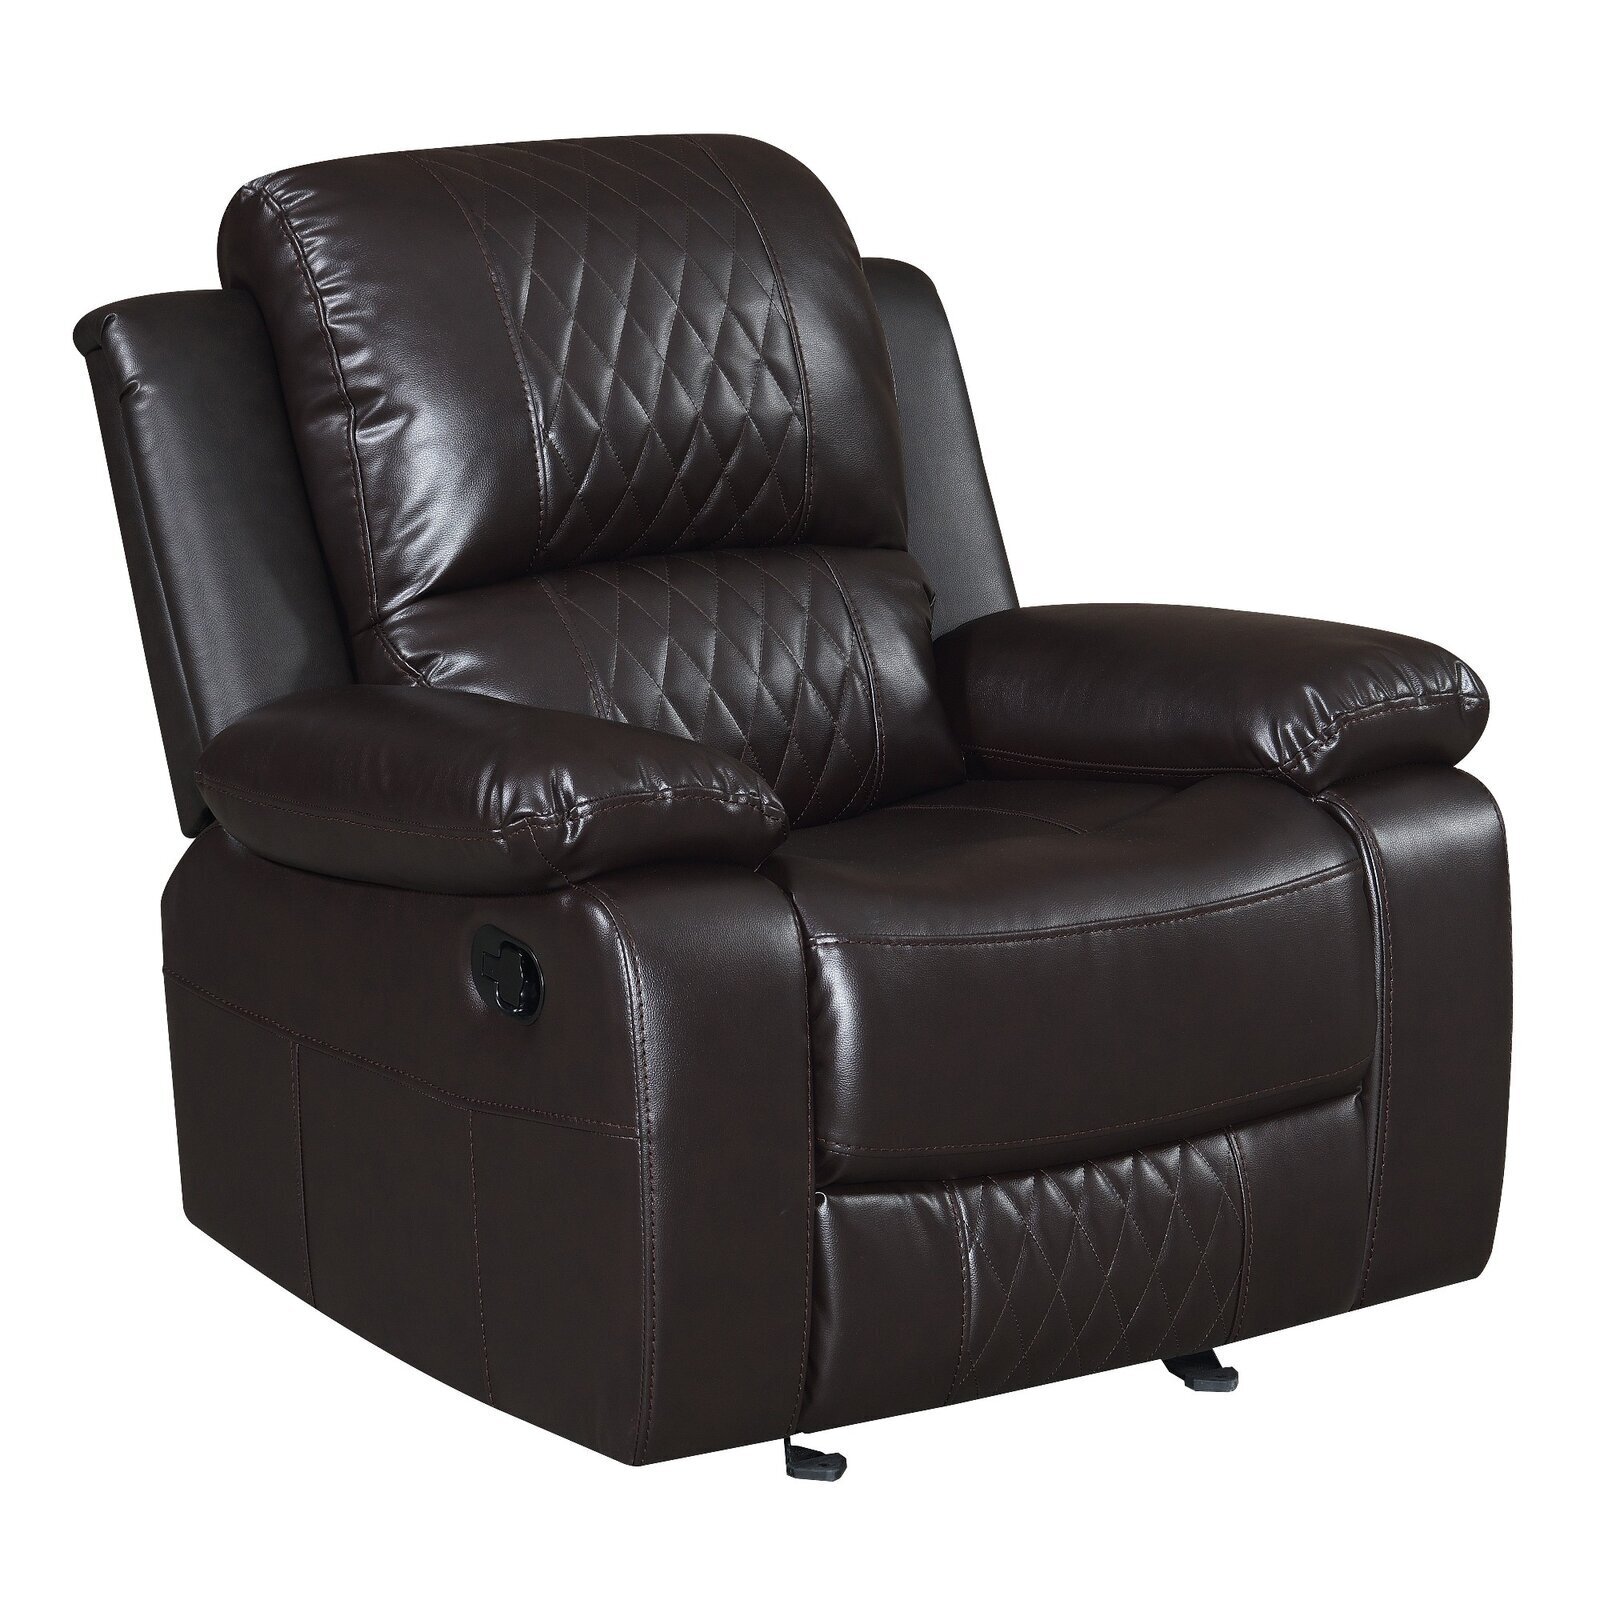 Extra Wide 37 75’’ Leather Glider Recliner